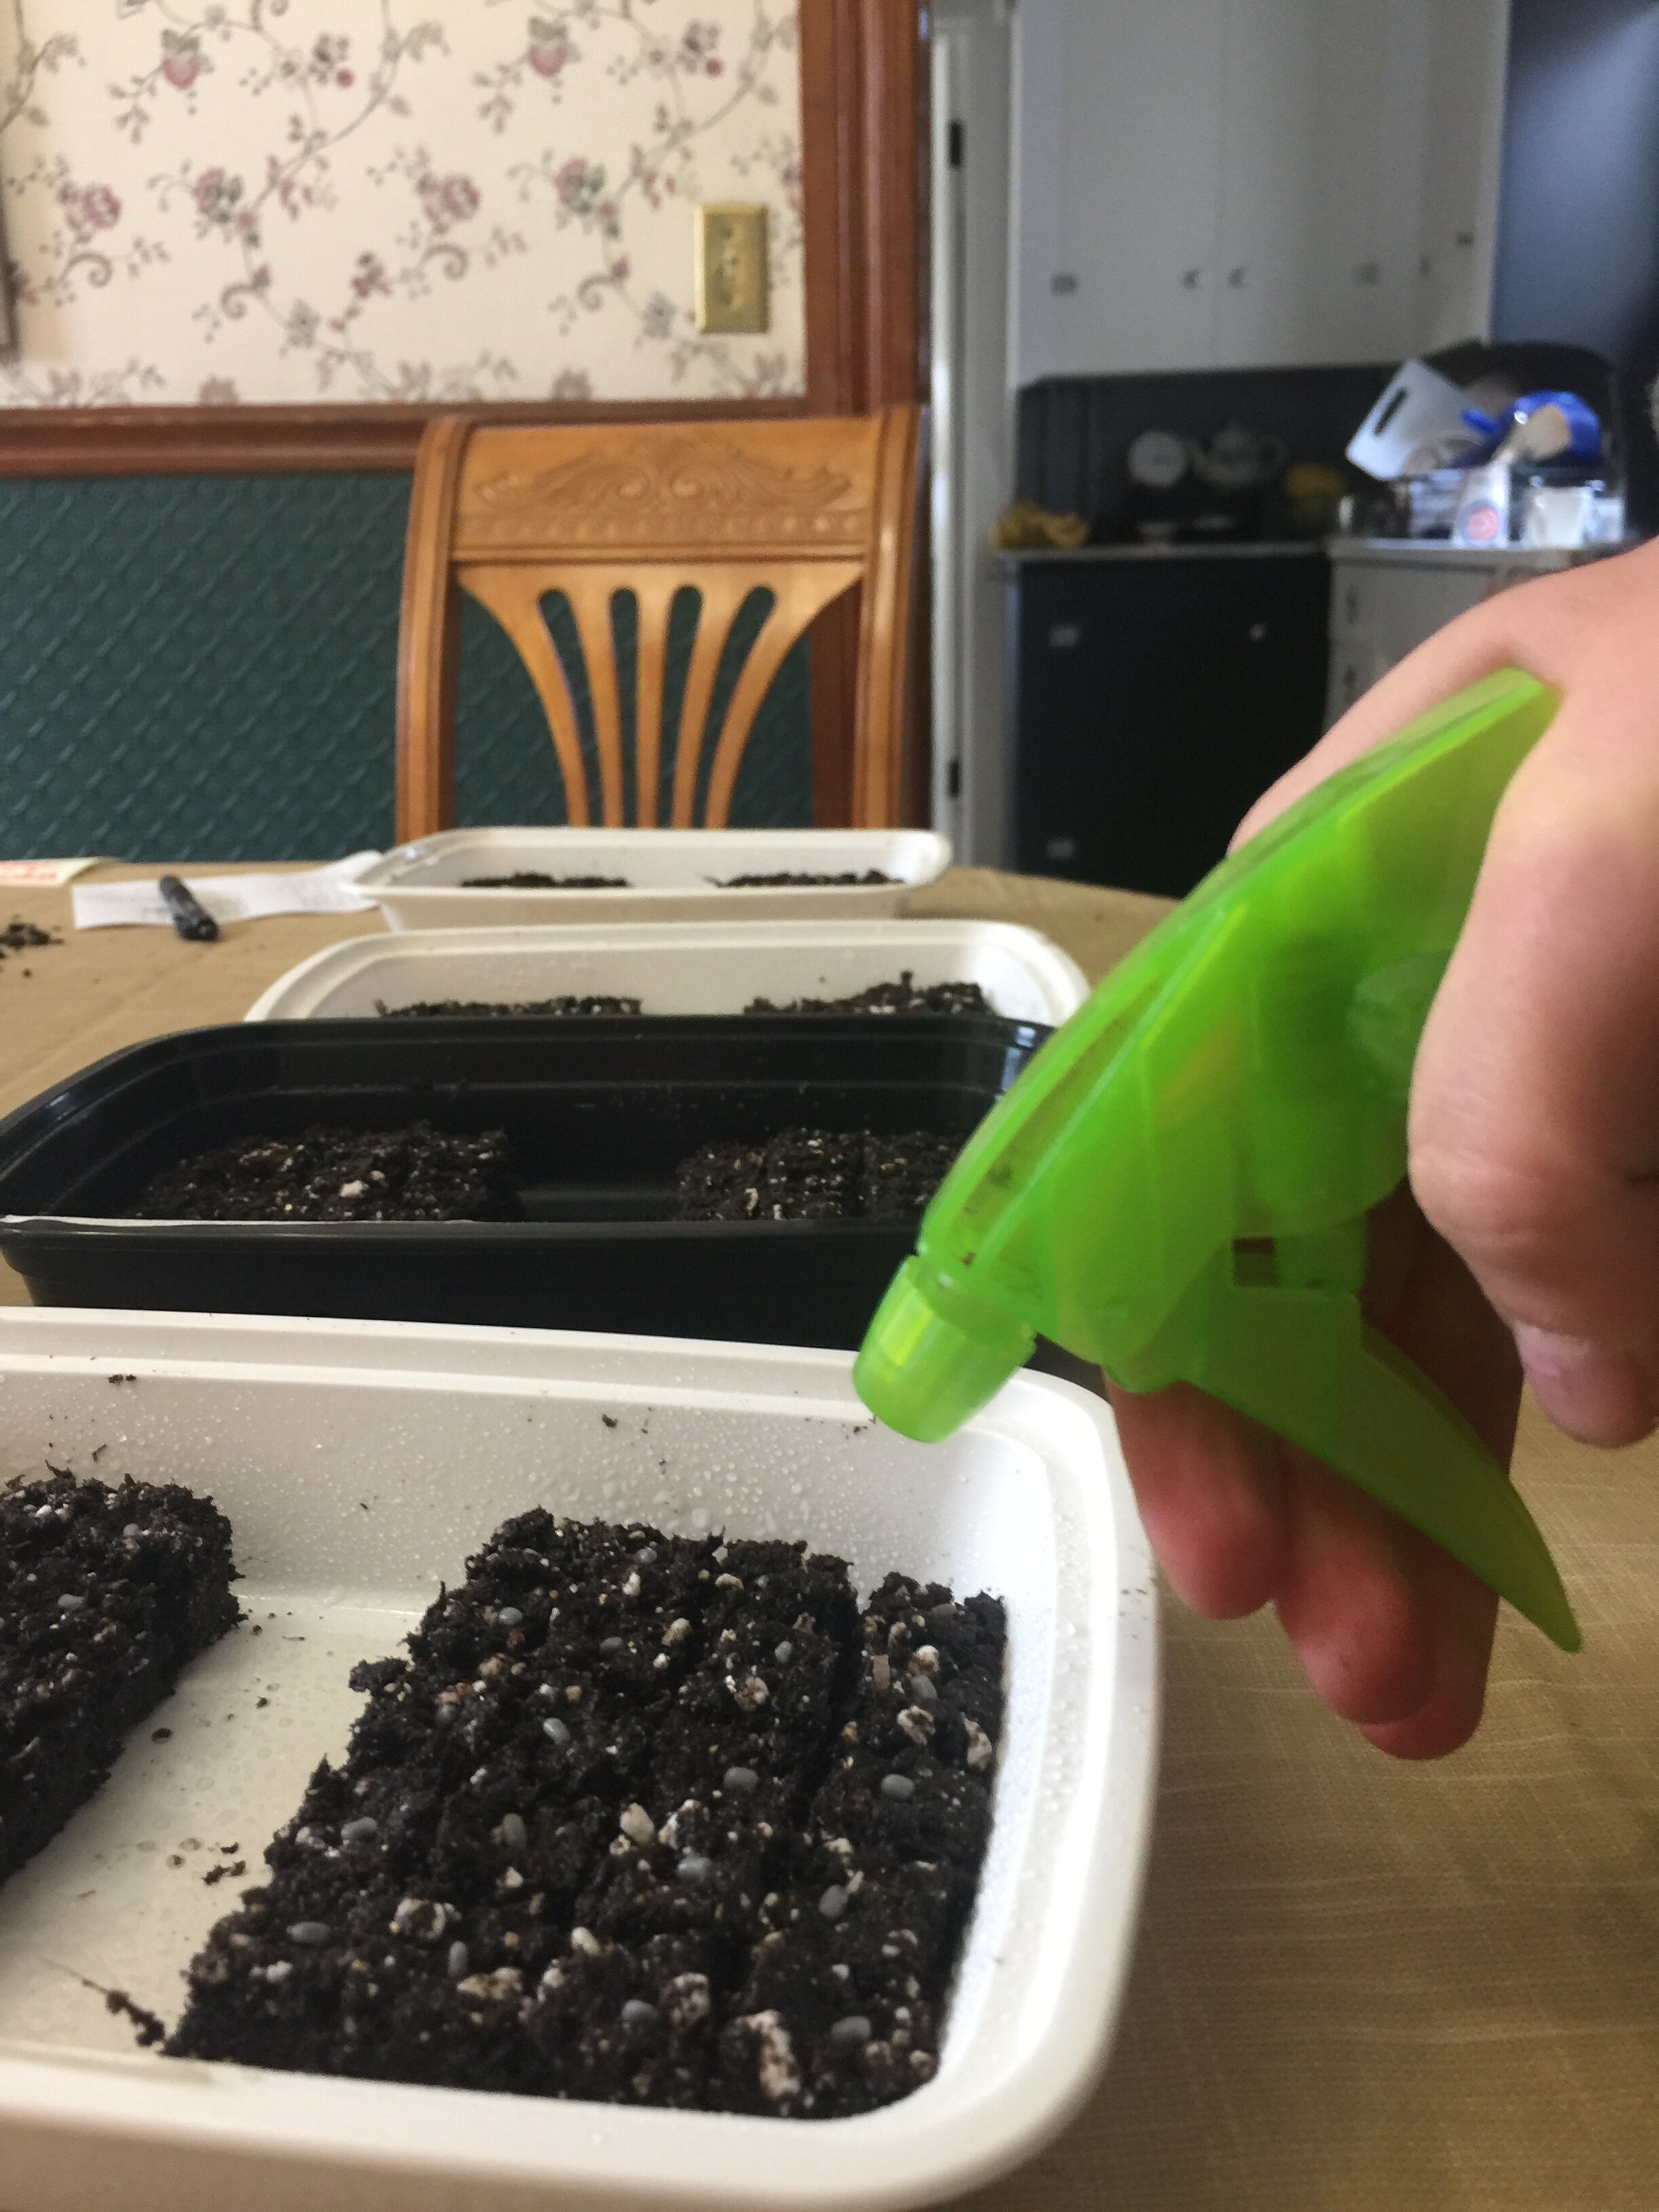 13. Spray Seeds with Water Bottle